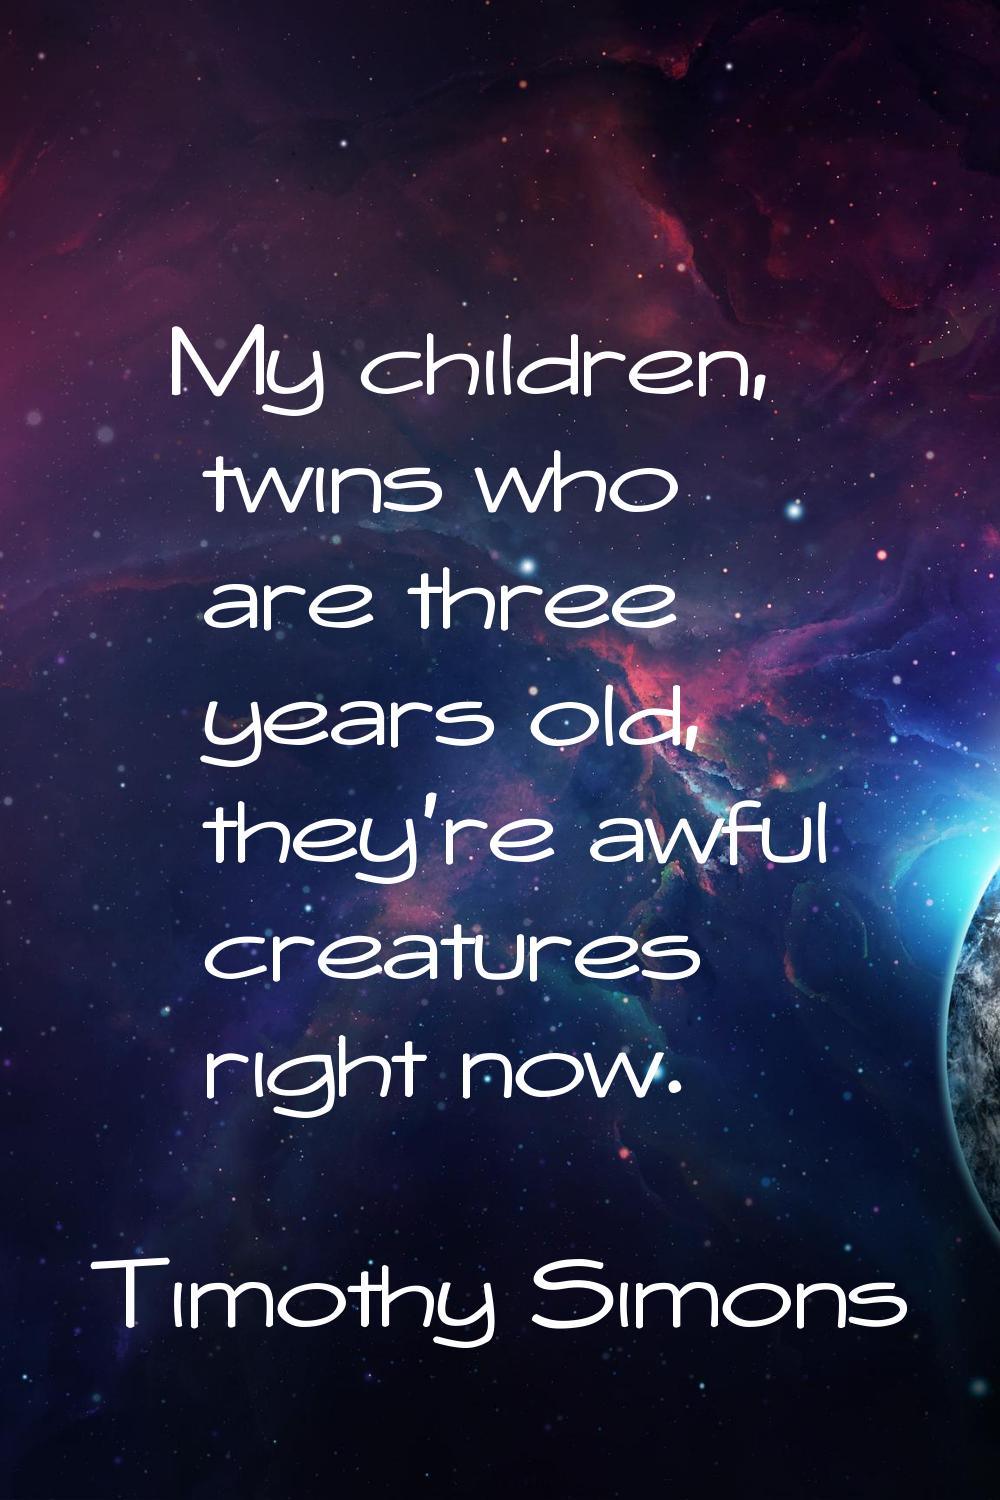 My children, twins who are three years old, they're awful creatures right now.